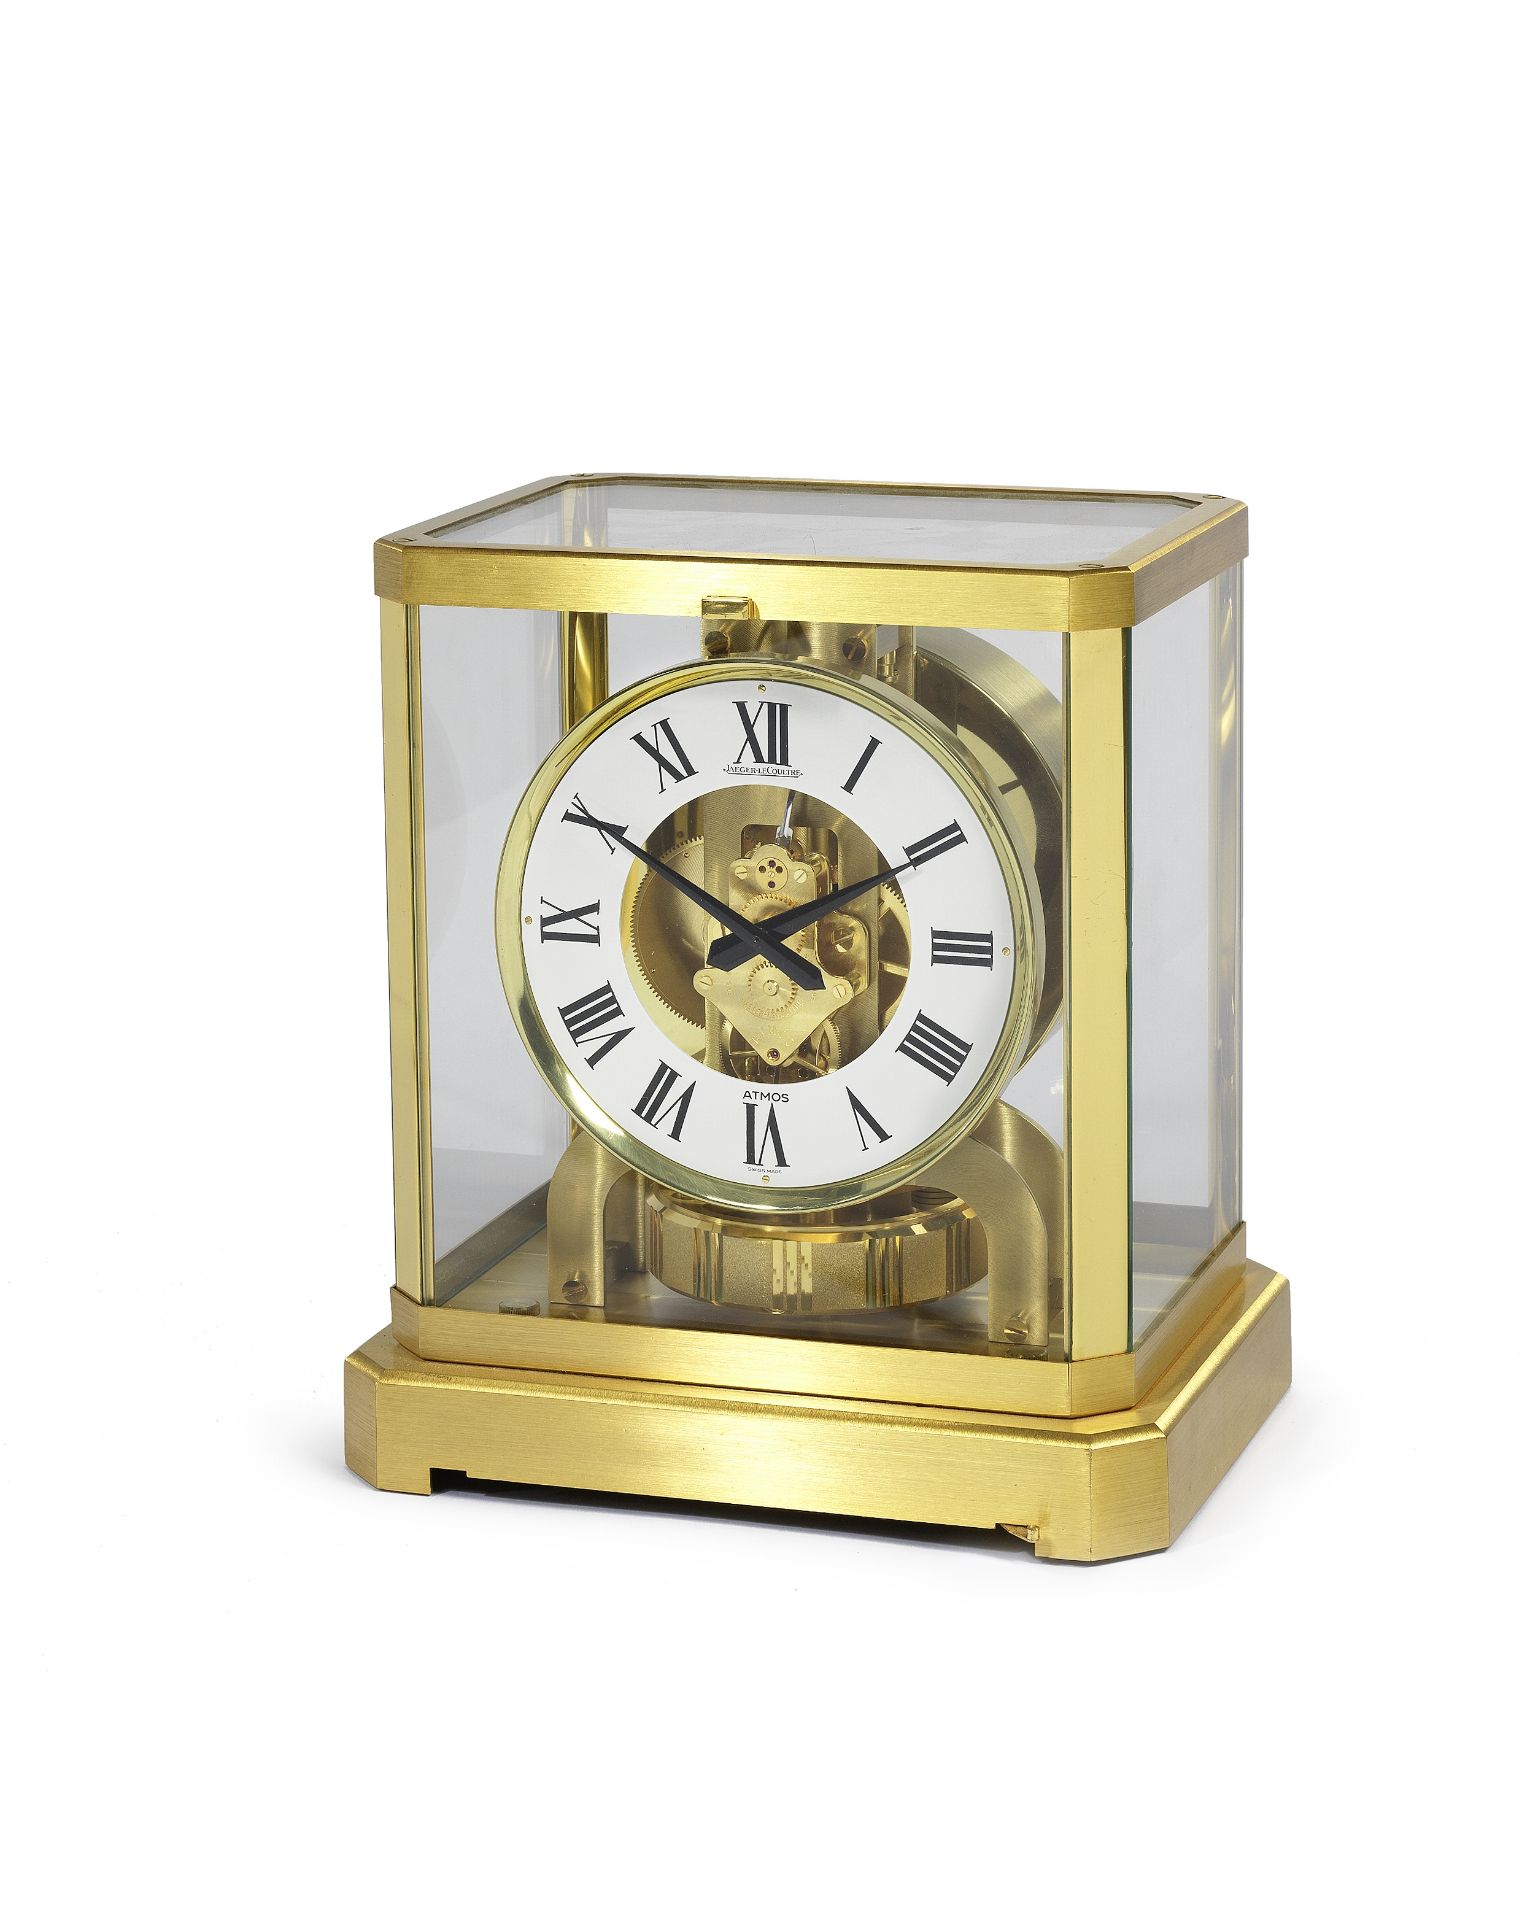 A 20th century Atmos clock in an associated box with service paperwork Jaeger LeCoultre, 265760, ...